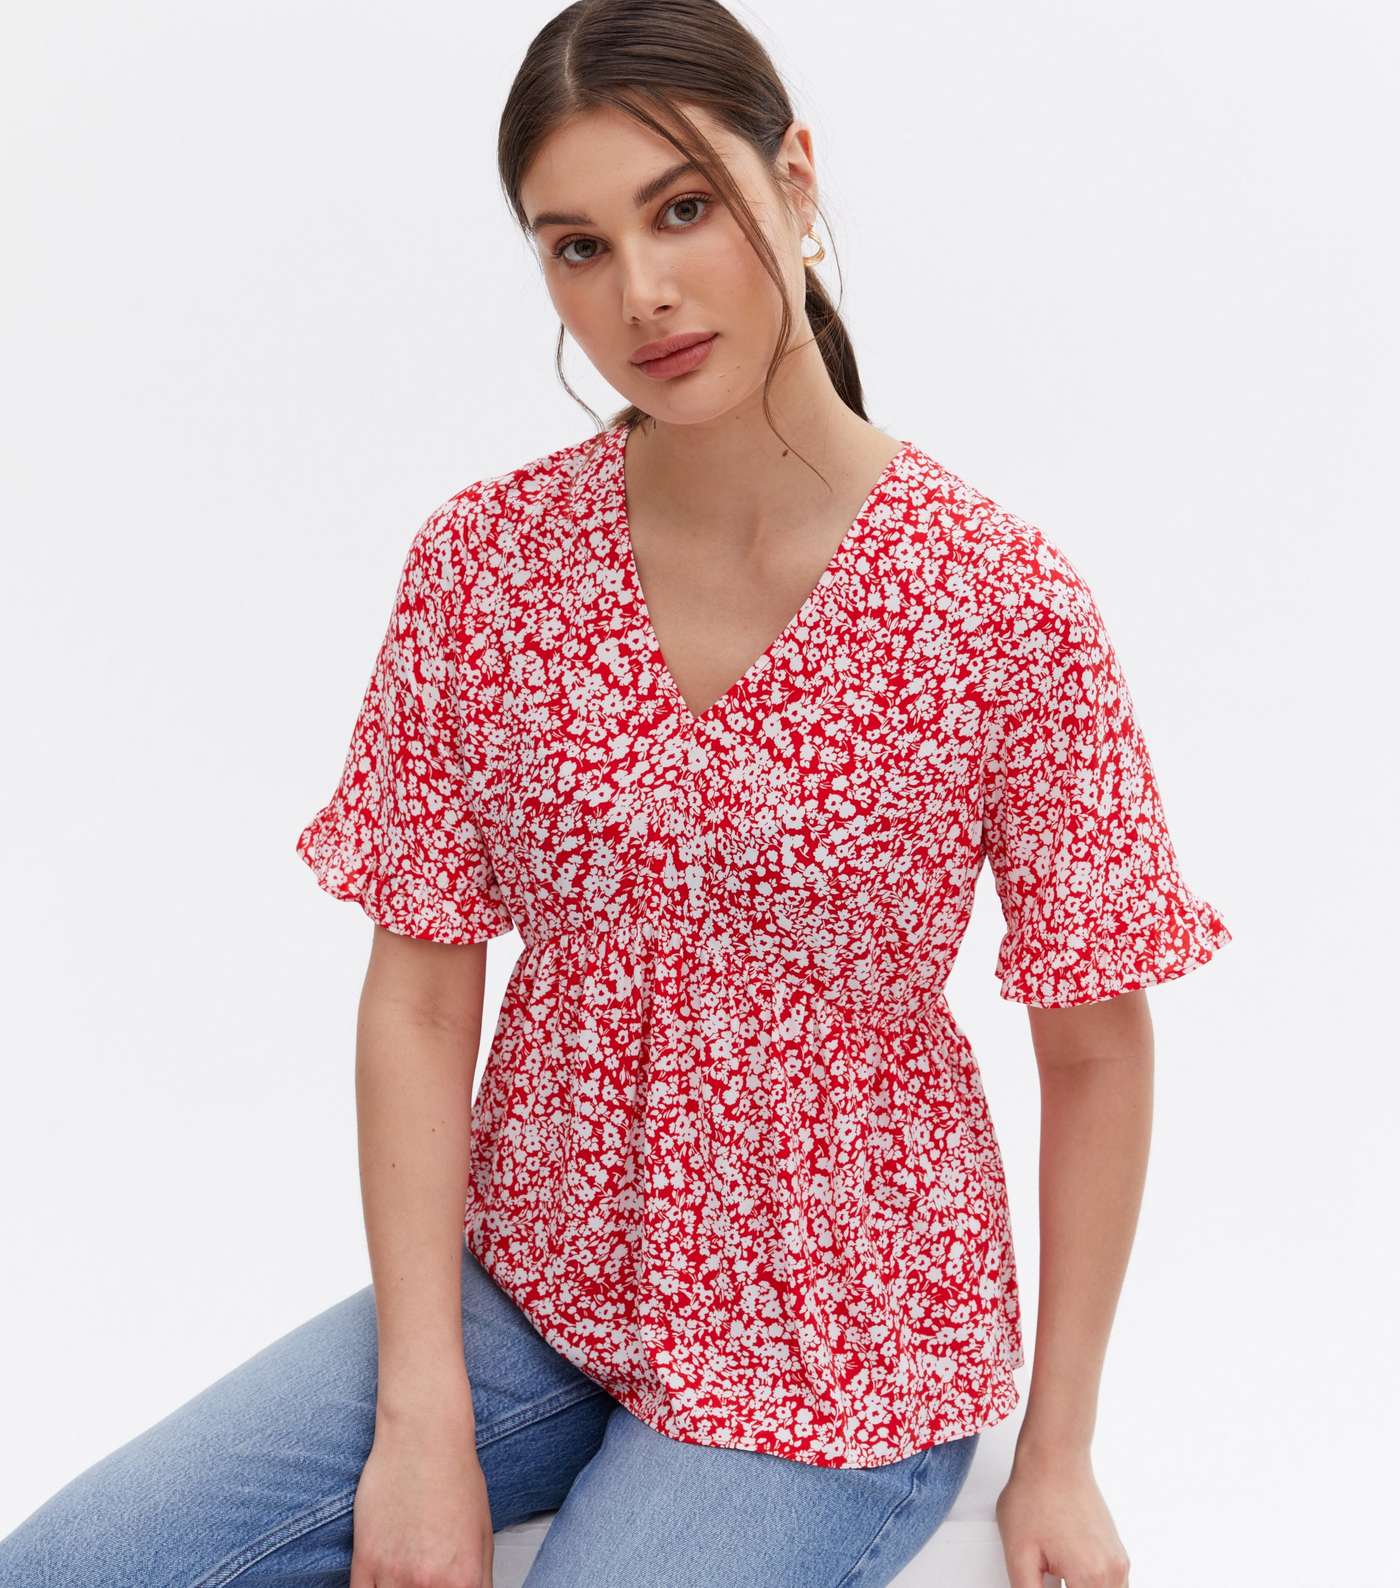 Red Floral Frill Peplum Blouse